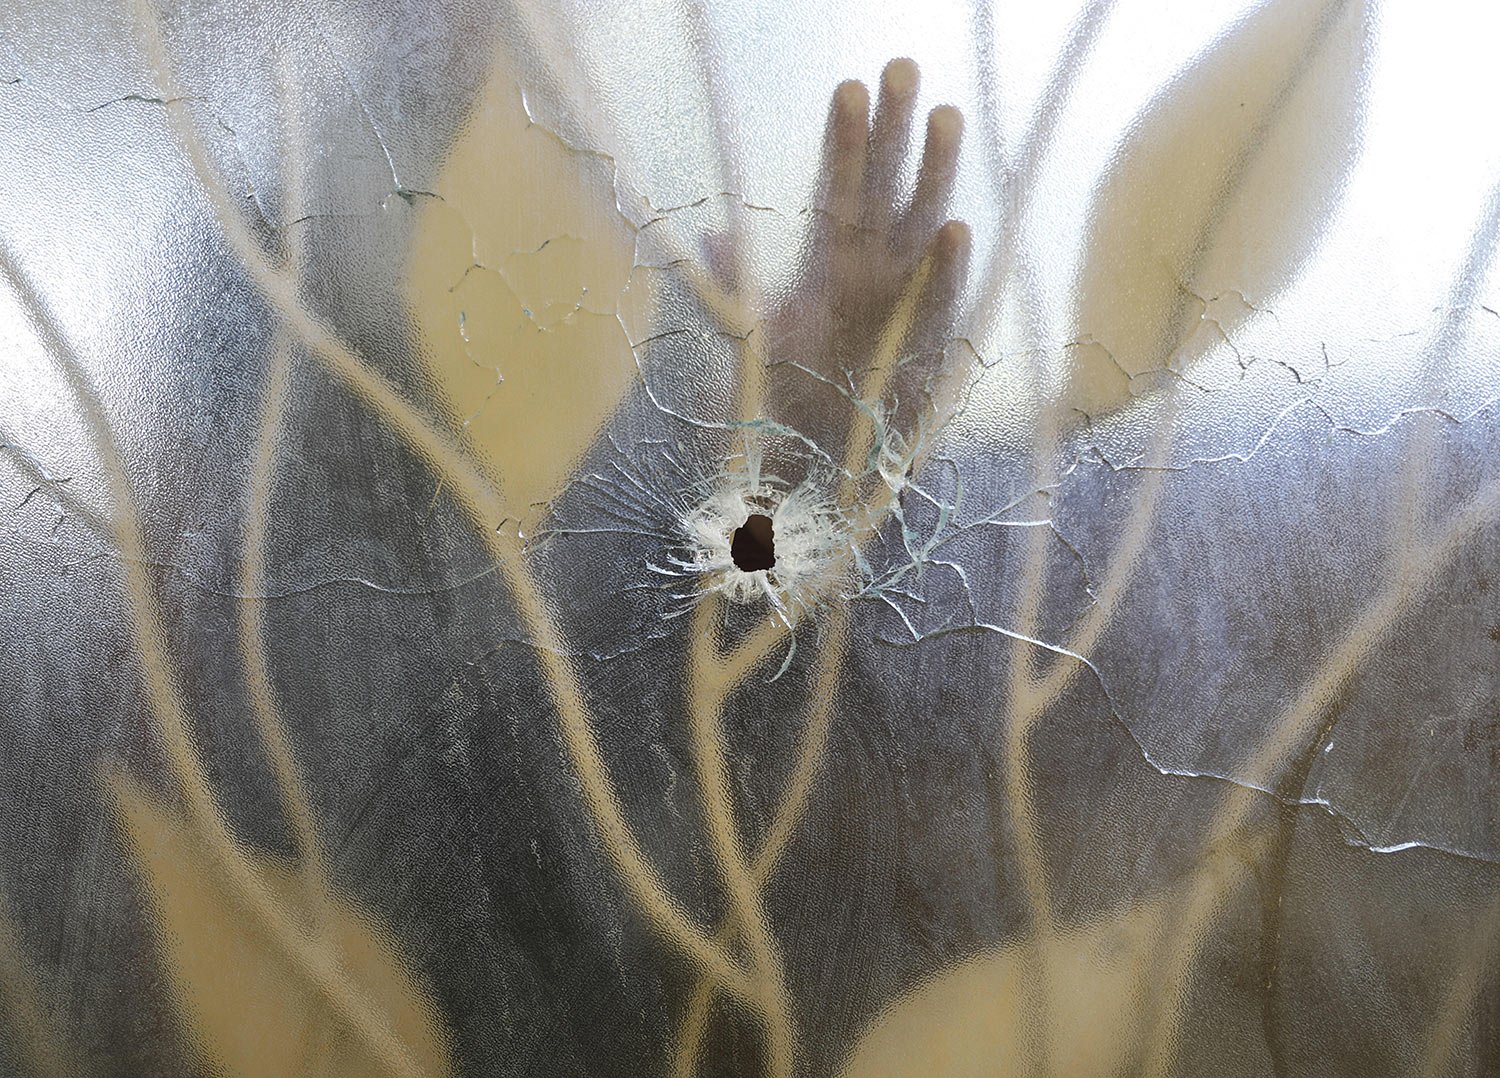  A hospital worker places his hand on a glass door within the clinic that was pierced by a bullet the previous day during an attack on the Fontaine Hospital Center in the Cité Soleil area of Port-au-Prince, Haiti, Nov. 16, 2023. (AP Photo/Odelyn Jose